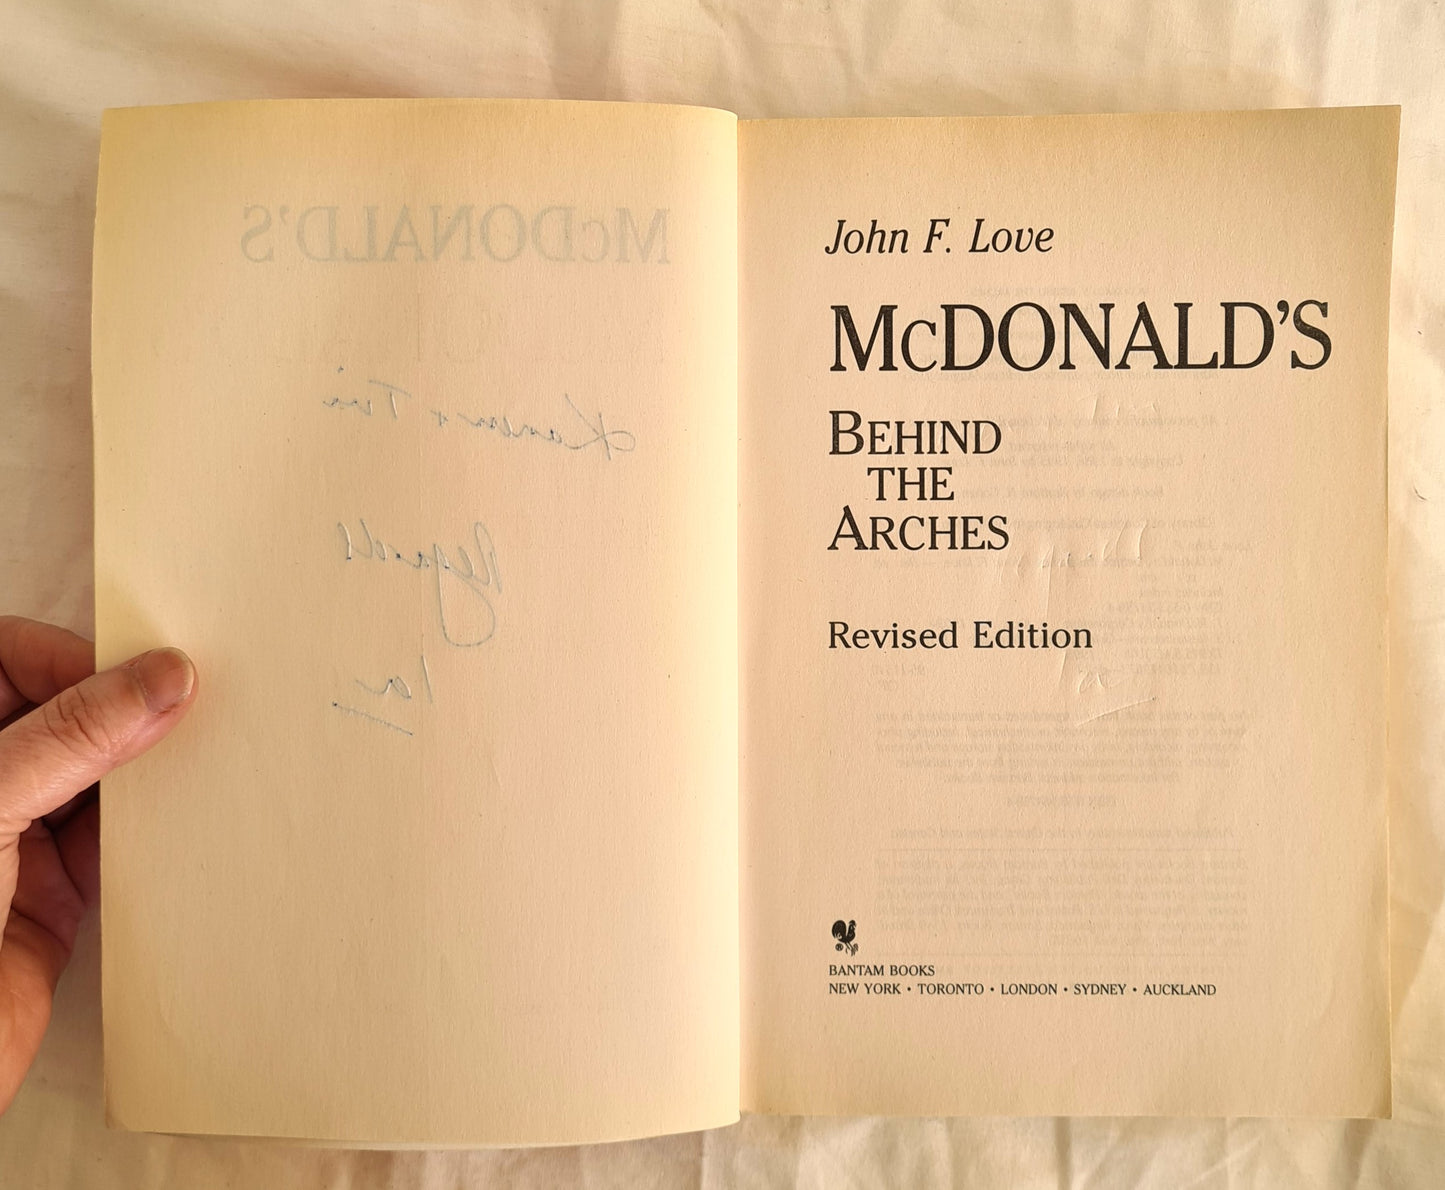 McDonald’s Behind the Arches by John F. Love